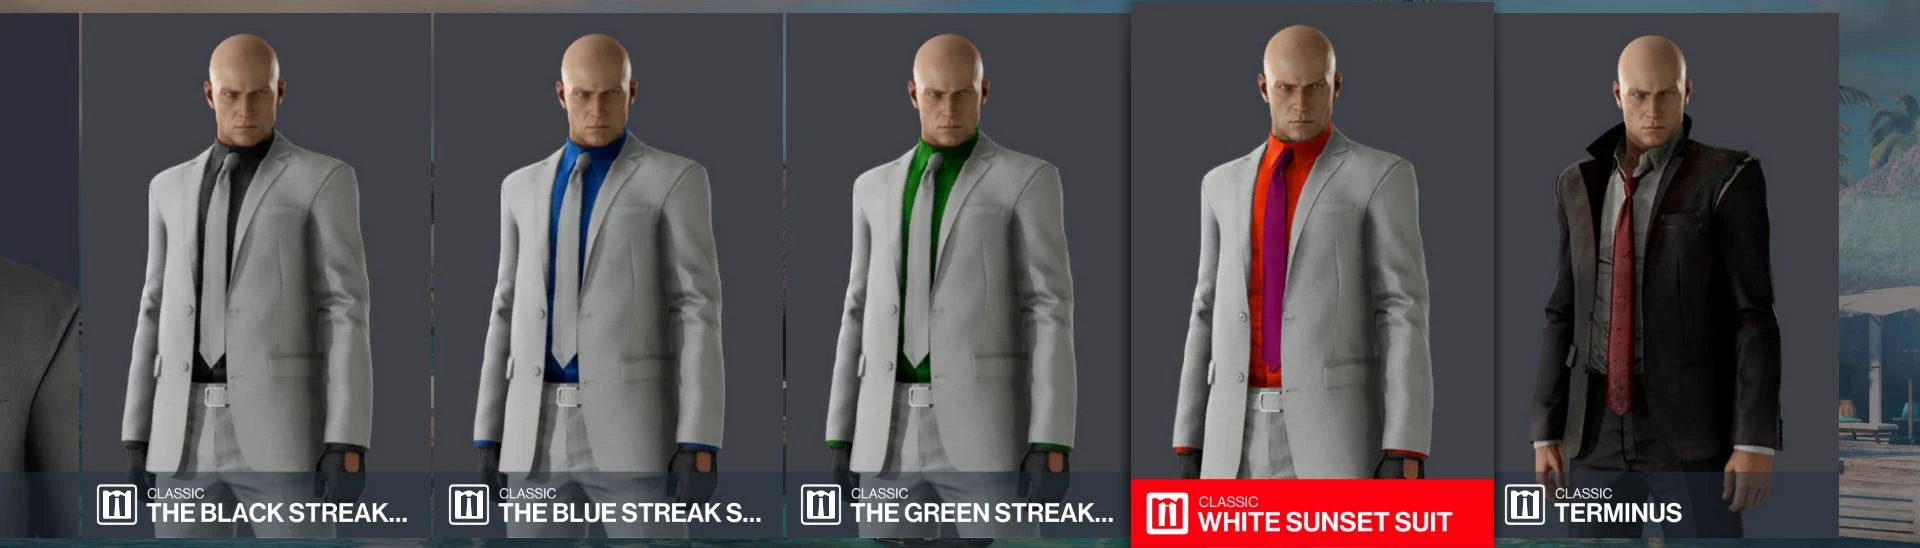 SOLVED] Problem with content pack (custom weapons) - HITMAN 3 Mod